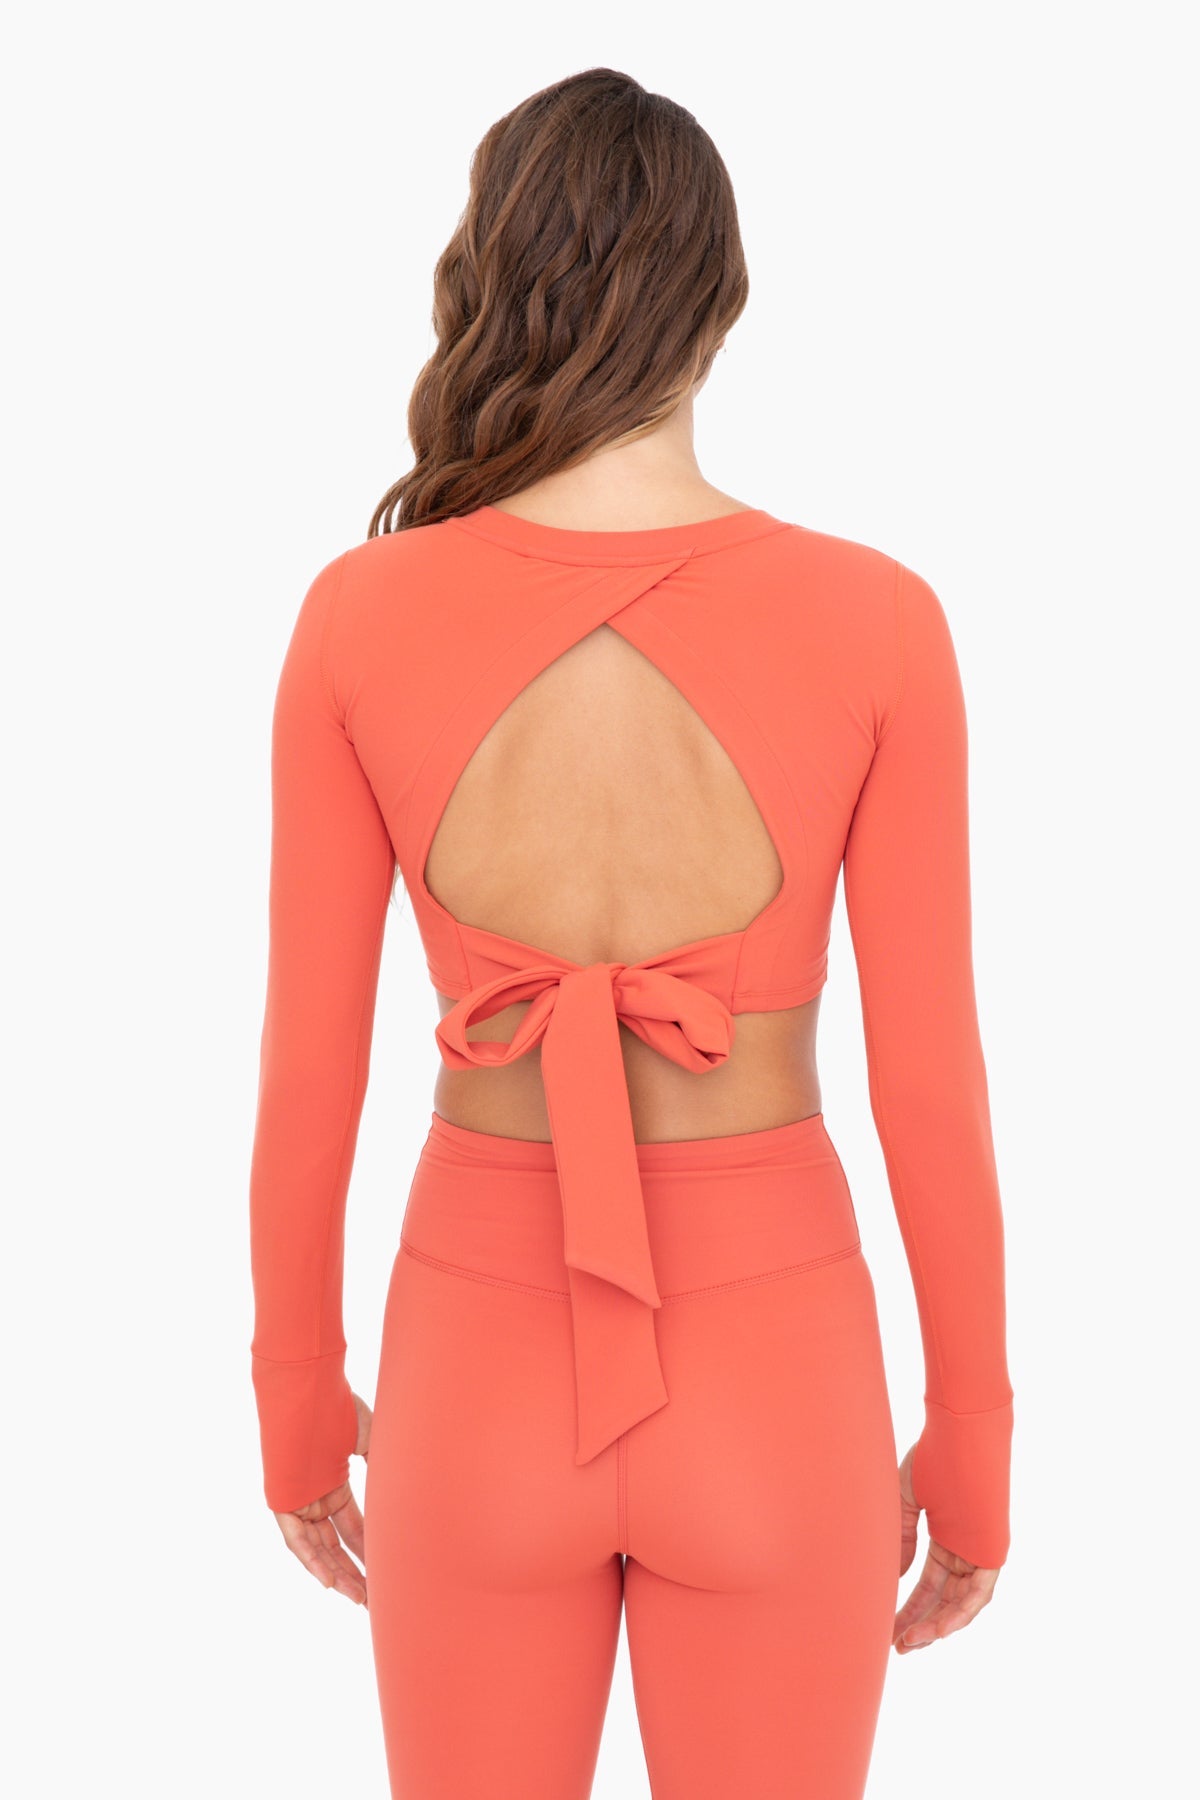 Cropped Long-Sleeve Top With Tie-Back - AT-A0731